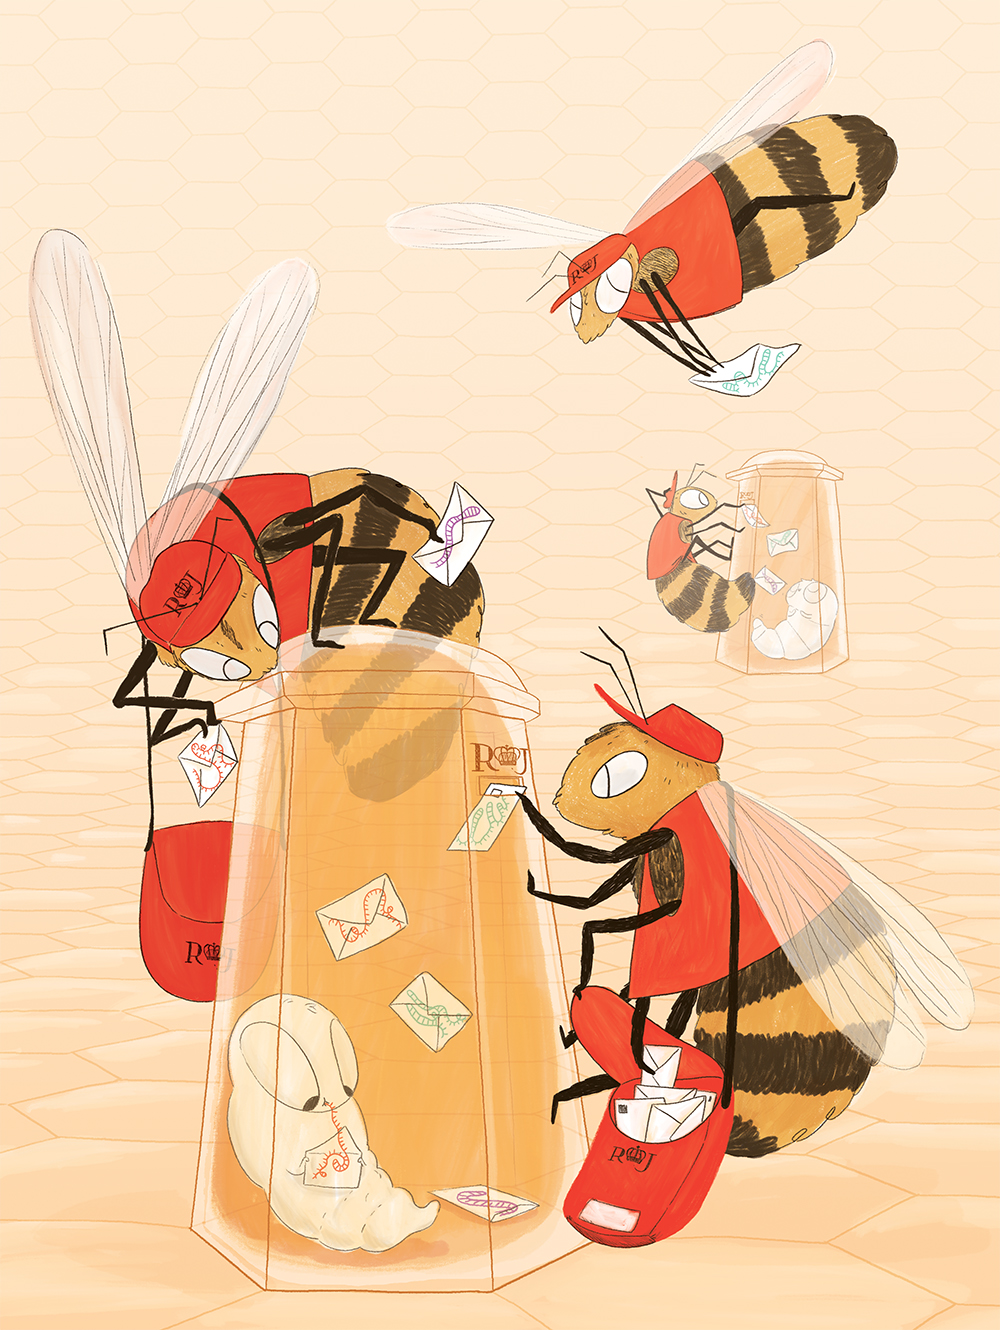 Discovery Of Rna Transfer Through Royal Jelly Could Aid Development Of Honey Bee Vaccines